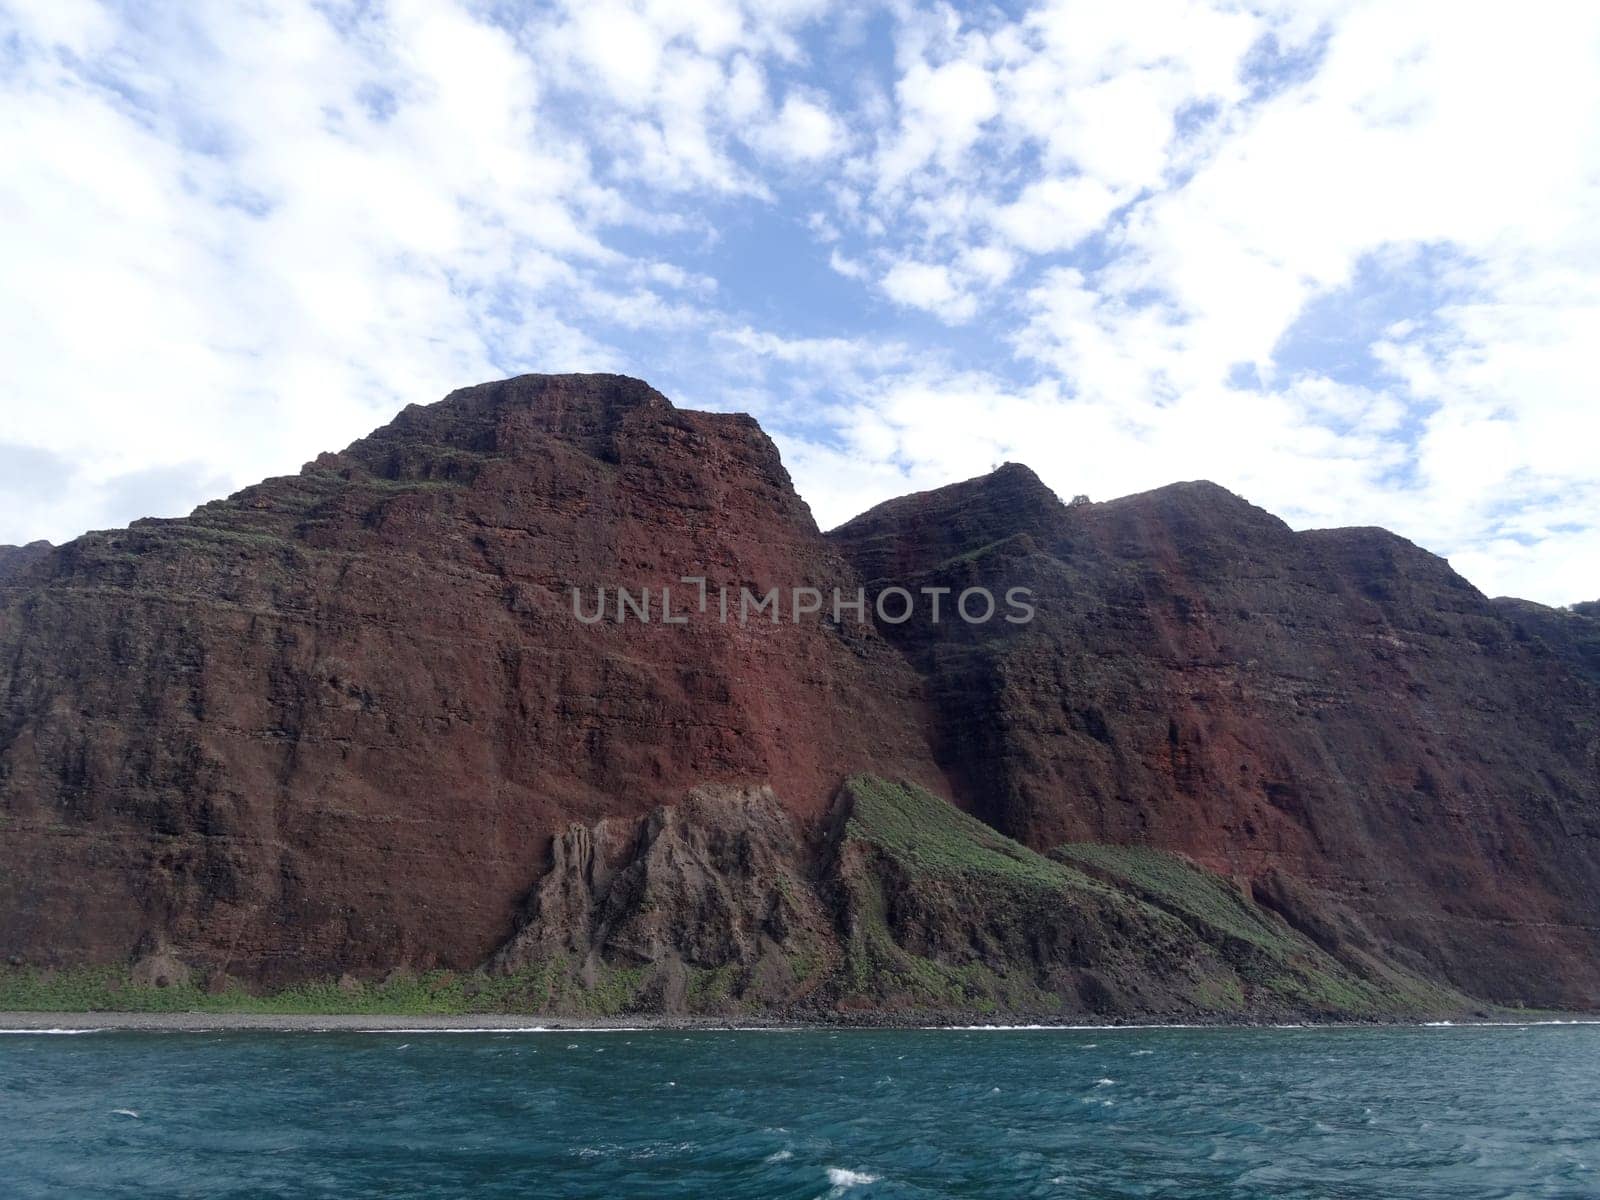 The Na Pali Coast on Kauai, a rugged and scenic stretch of coastline with red cliffs, green vegetation, and blue ocean.